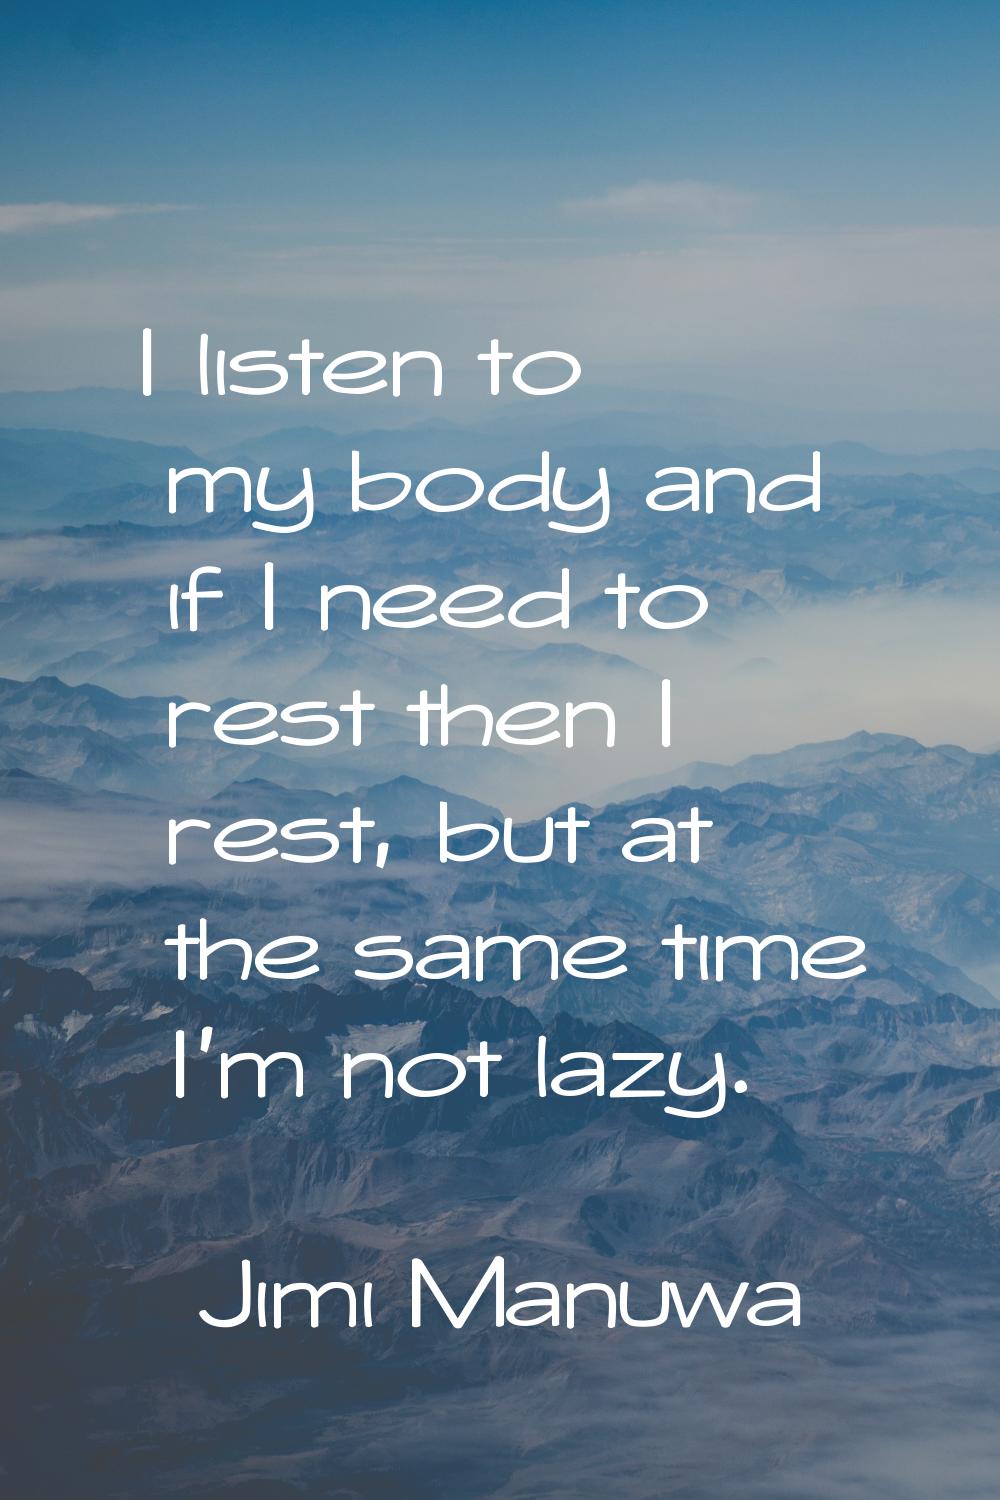 I listen to my body and if I need to rest then I rest, but at the same time I'm not lazy.